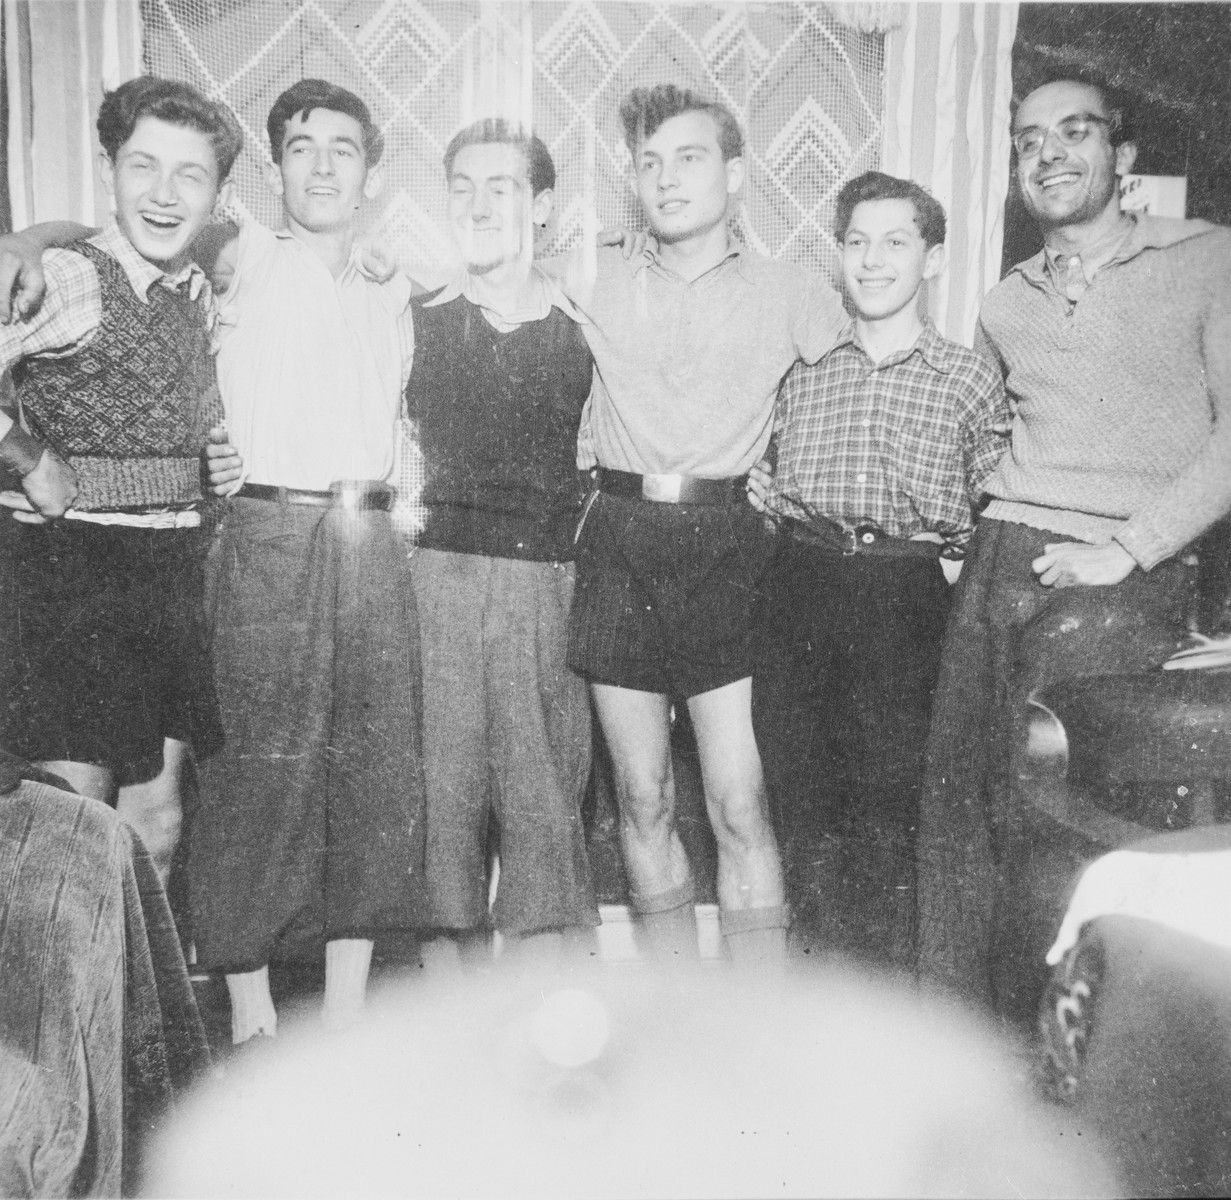 Group portrait of members of the Hehalutz Zionist youth movement in Berlin.  

Among those pictured is Jizchak Schwersenz (at far right.